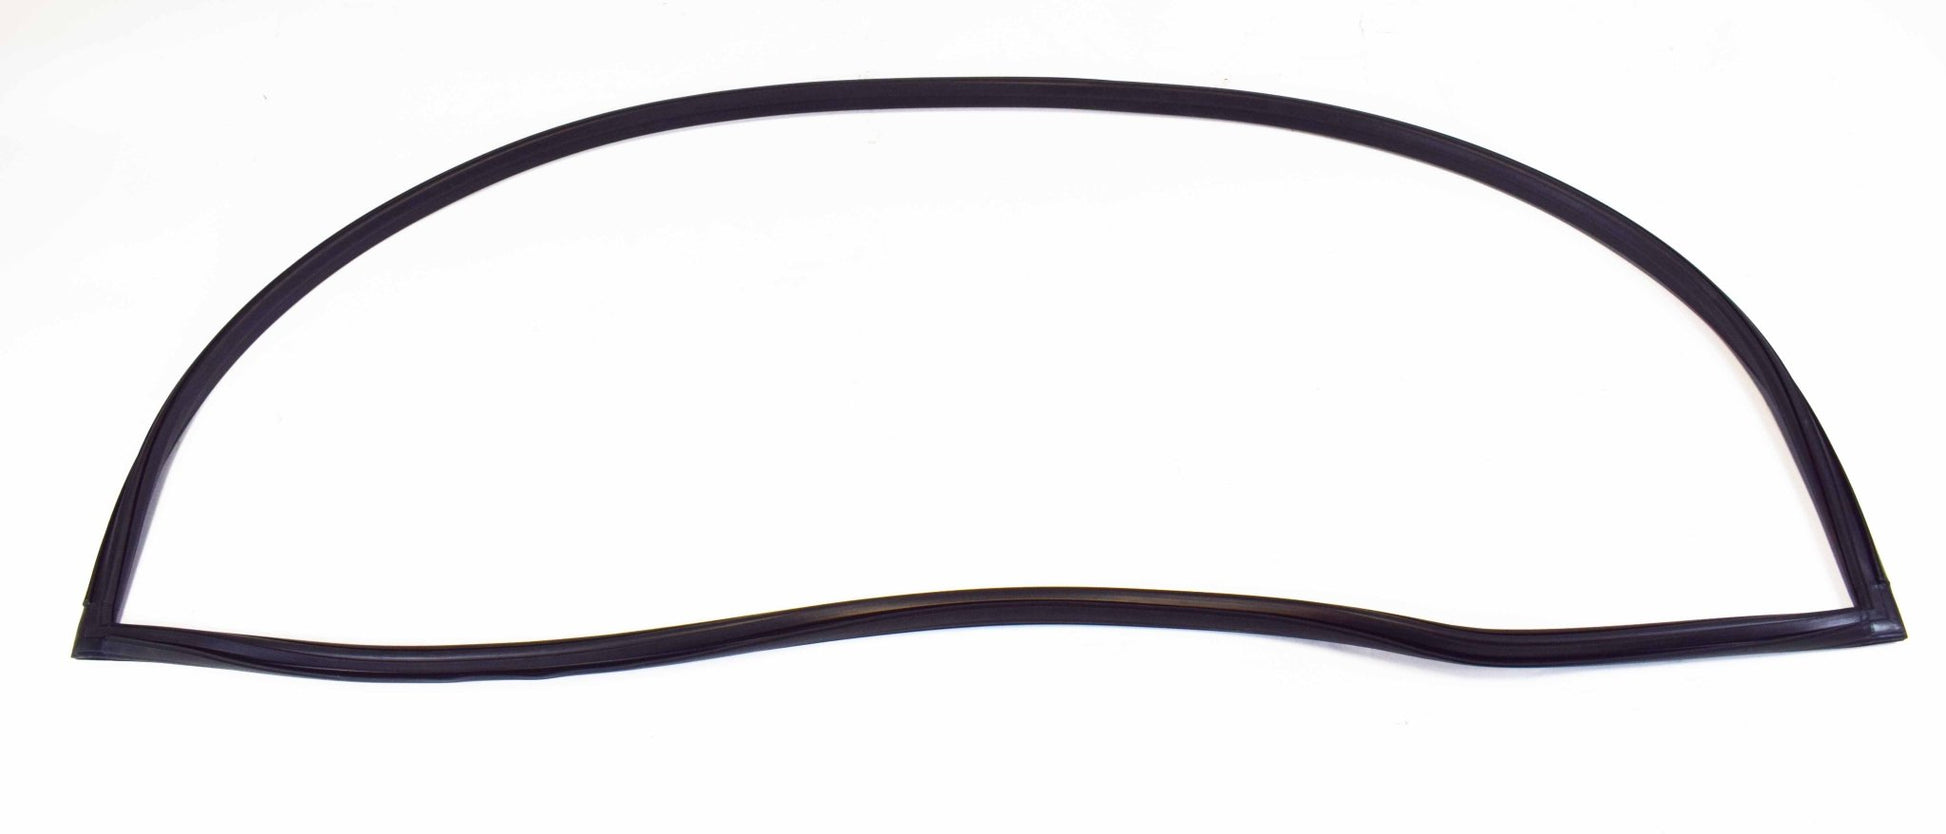 Windshield Rubber Seal, 1967-1973, Jeepster Commando and Commando, USA Made. - The JeepsterMan